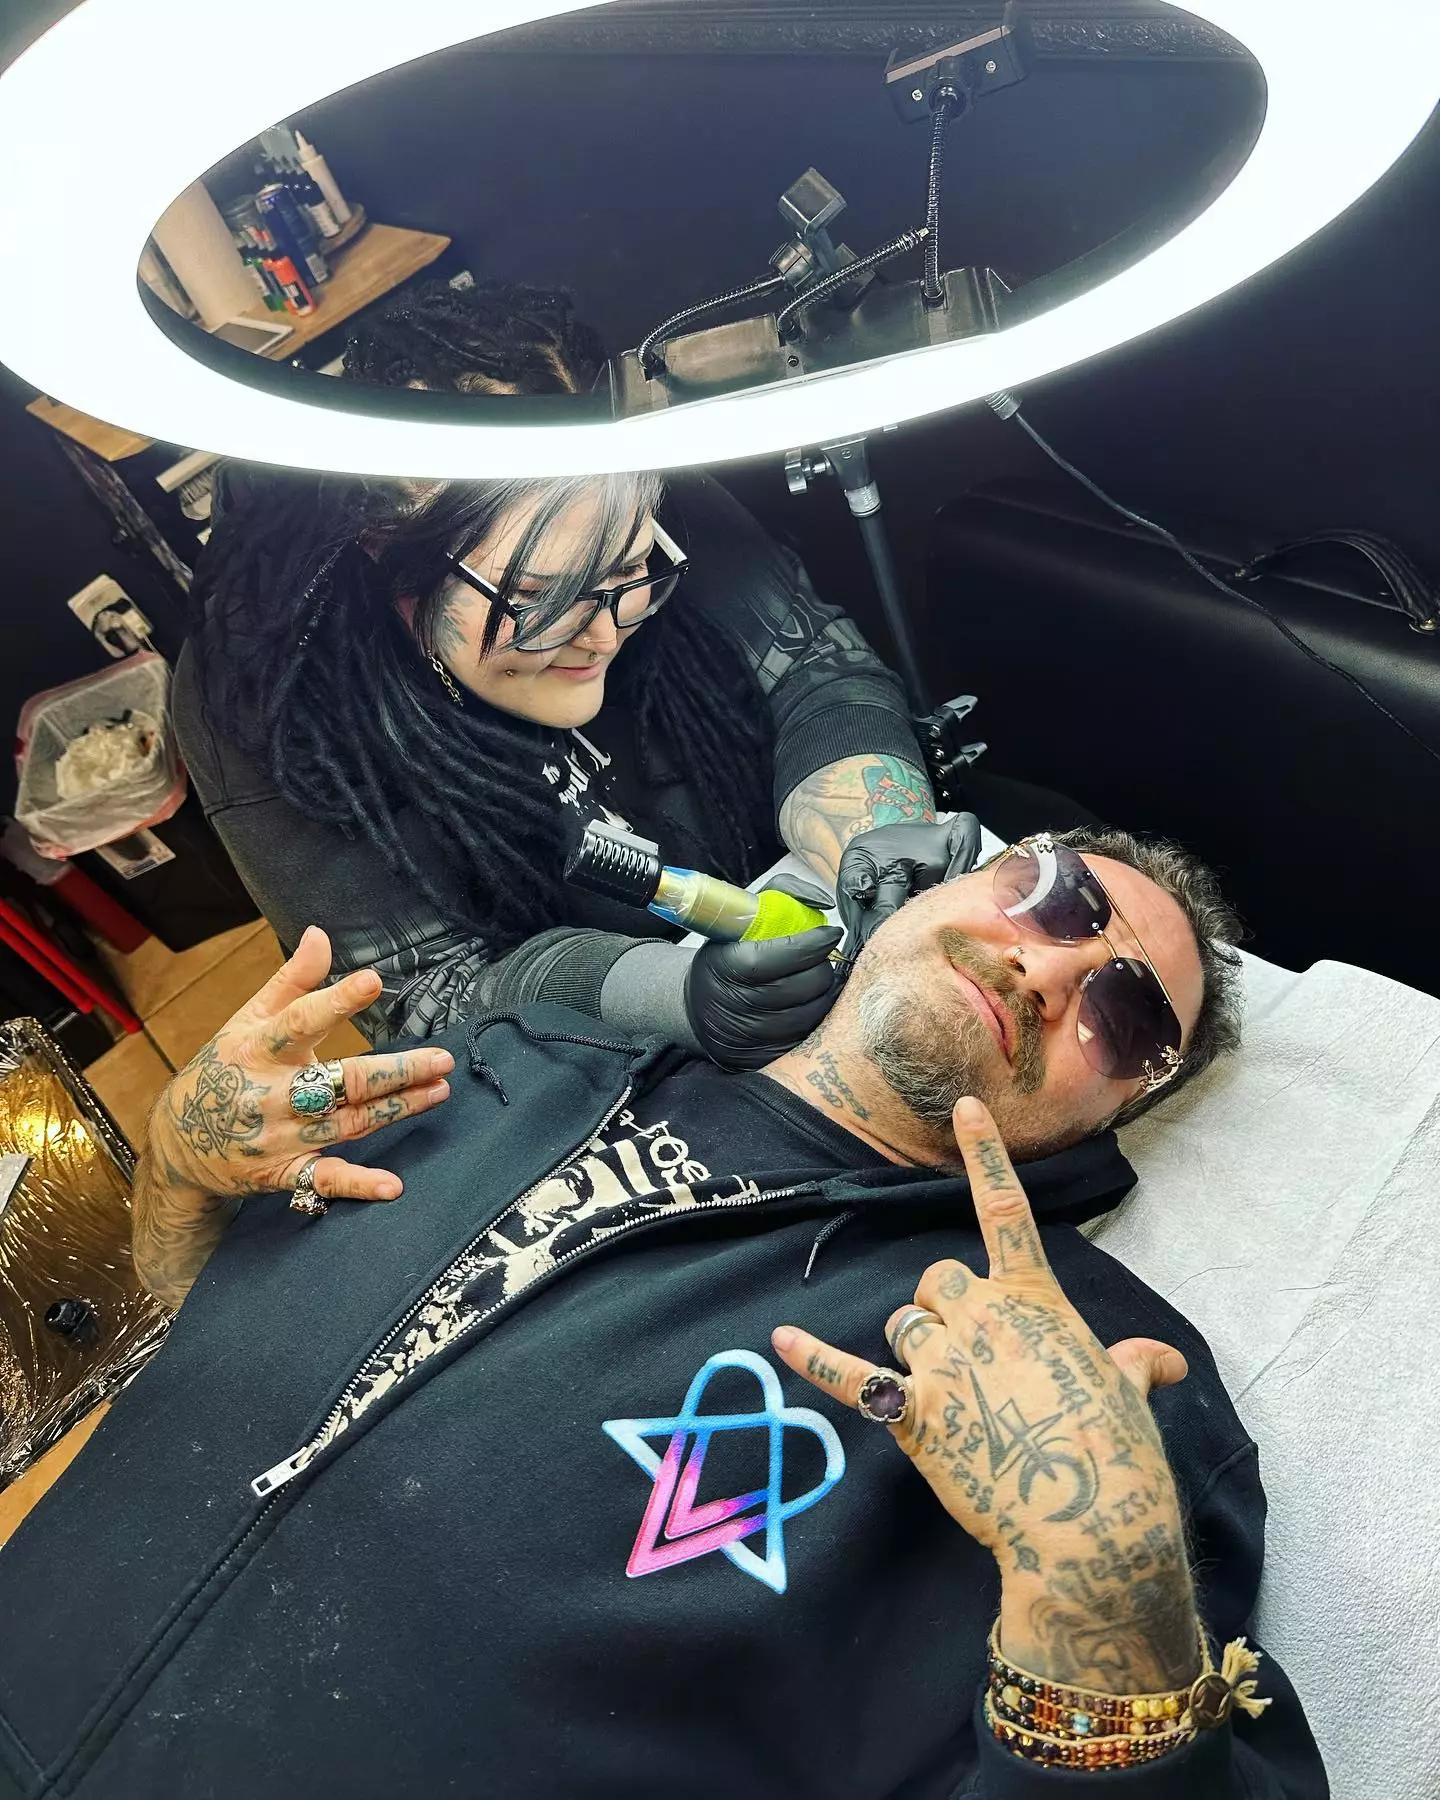 Bam Margera has recently added to his tattoo collection.